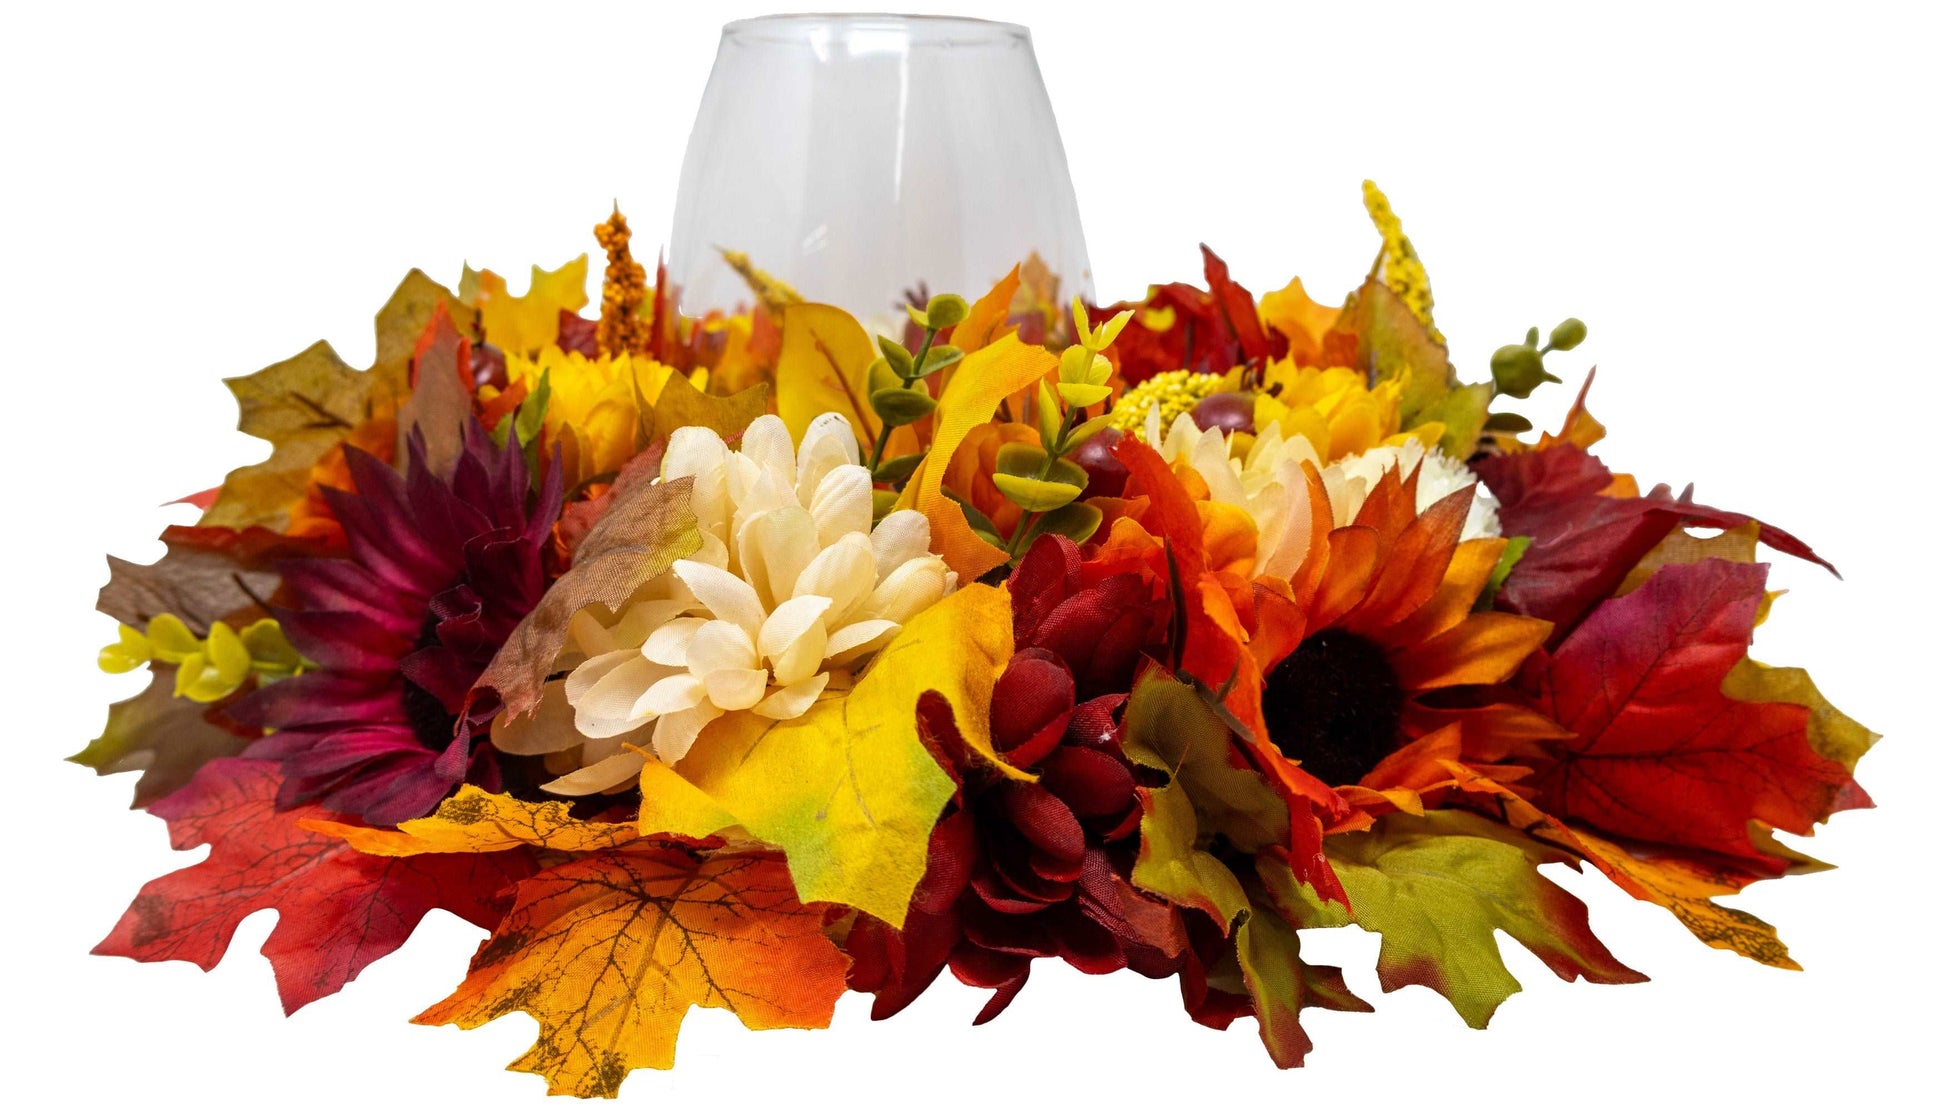 Fall Floral Round Centerpiece Wreath With Hurricane Glass Candle Holder